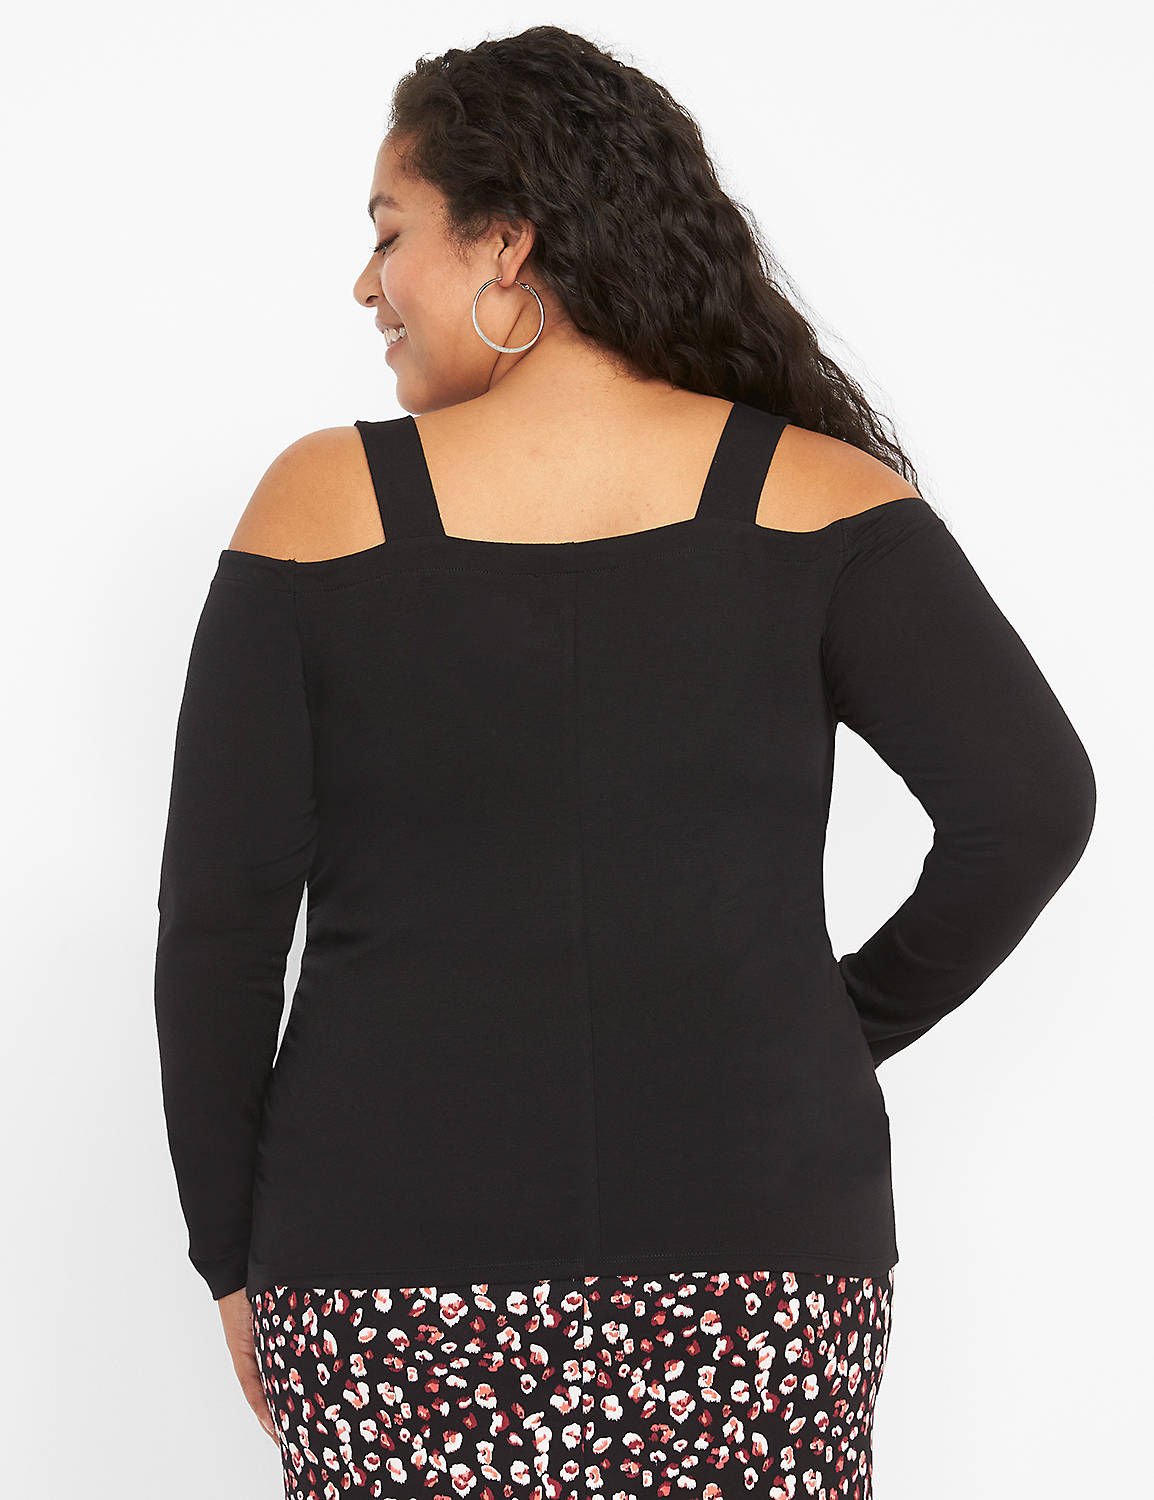 Long Sleeve Could Shoulder Cutout S Product Image 2